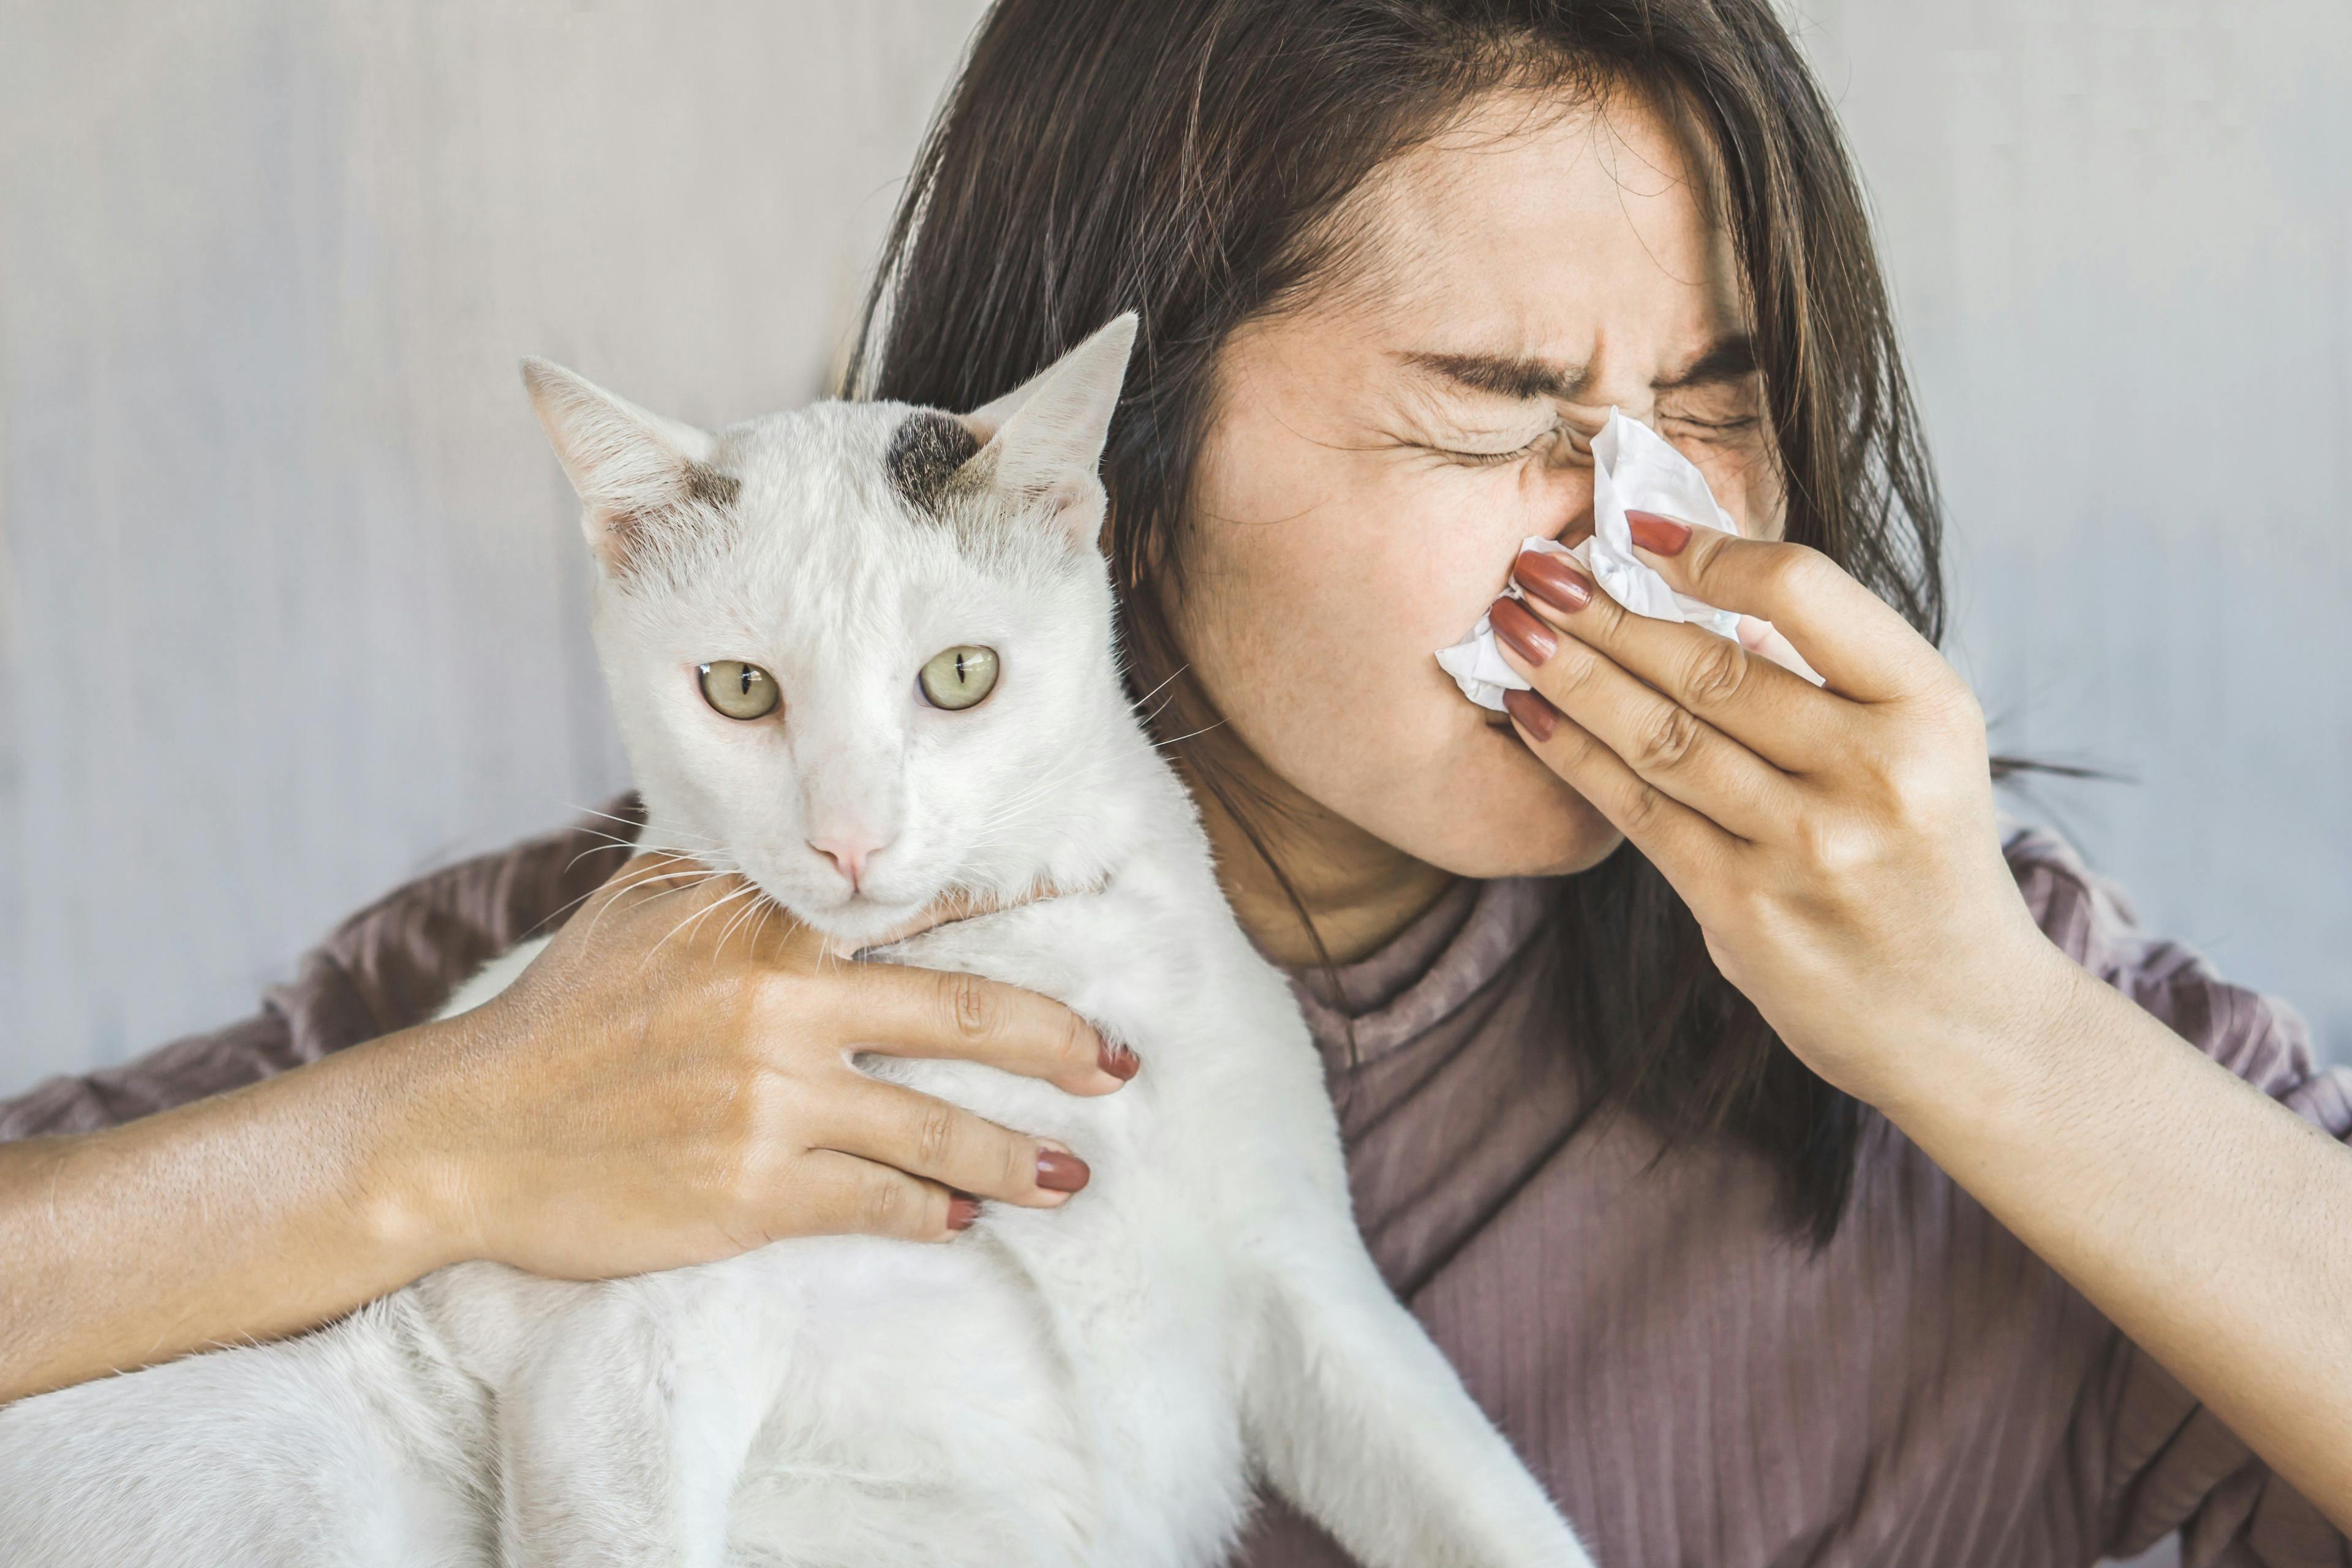 Researchers eye vaccination for cats that could alleviate human allergies